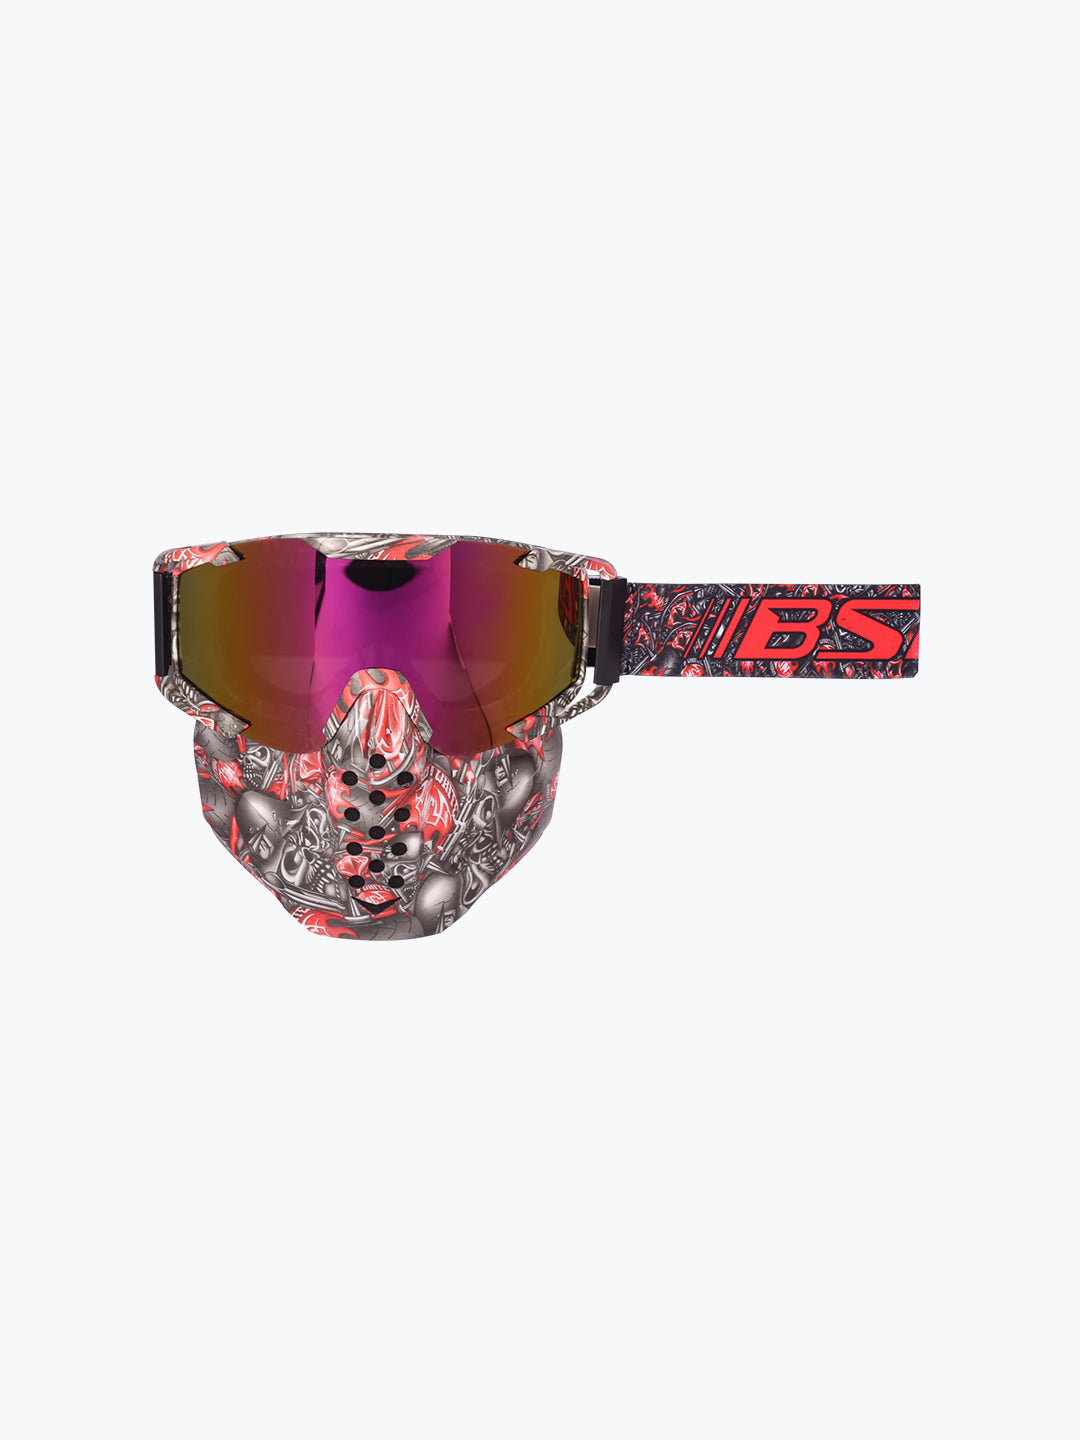 BSDDP Goggles With Mask Skull Red